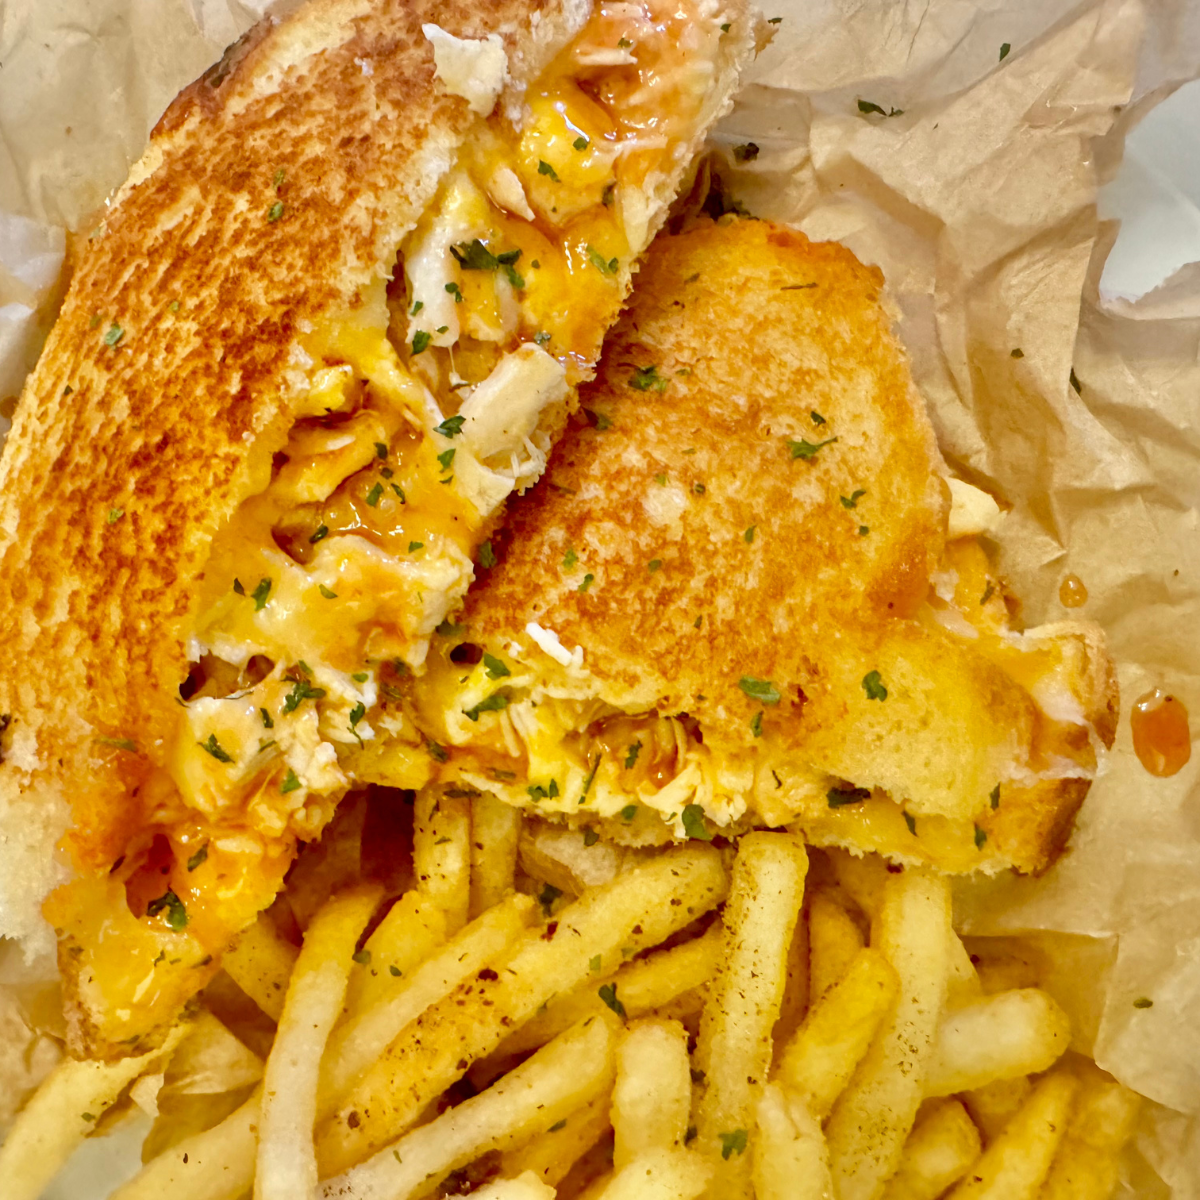 Buffalo Chicken Grilled Cheese on a bed of French fries